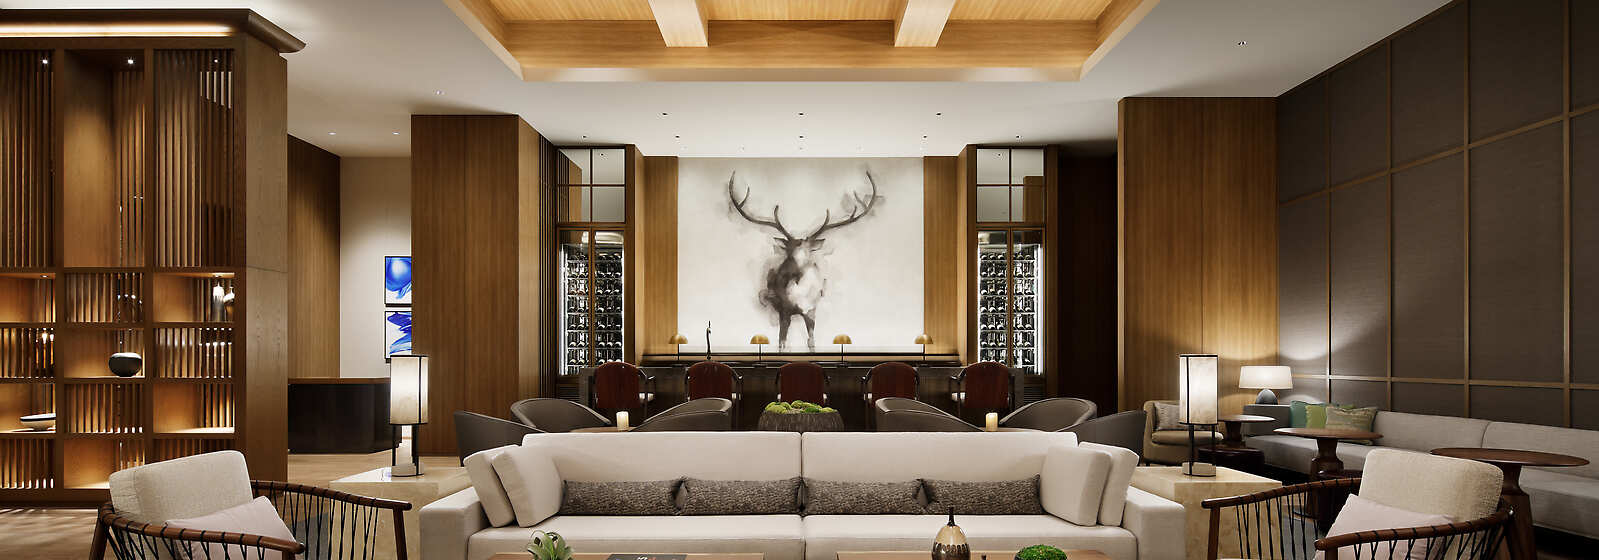 Lobby&Lounge Bar「Flying Stag」